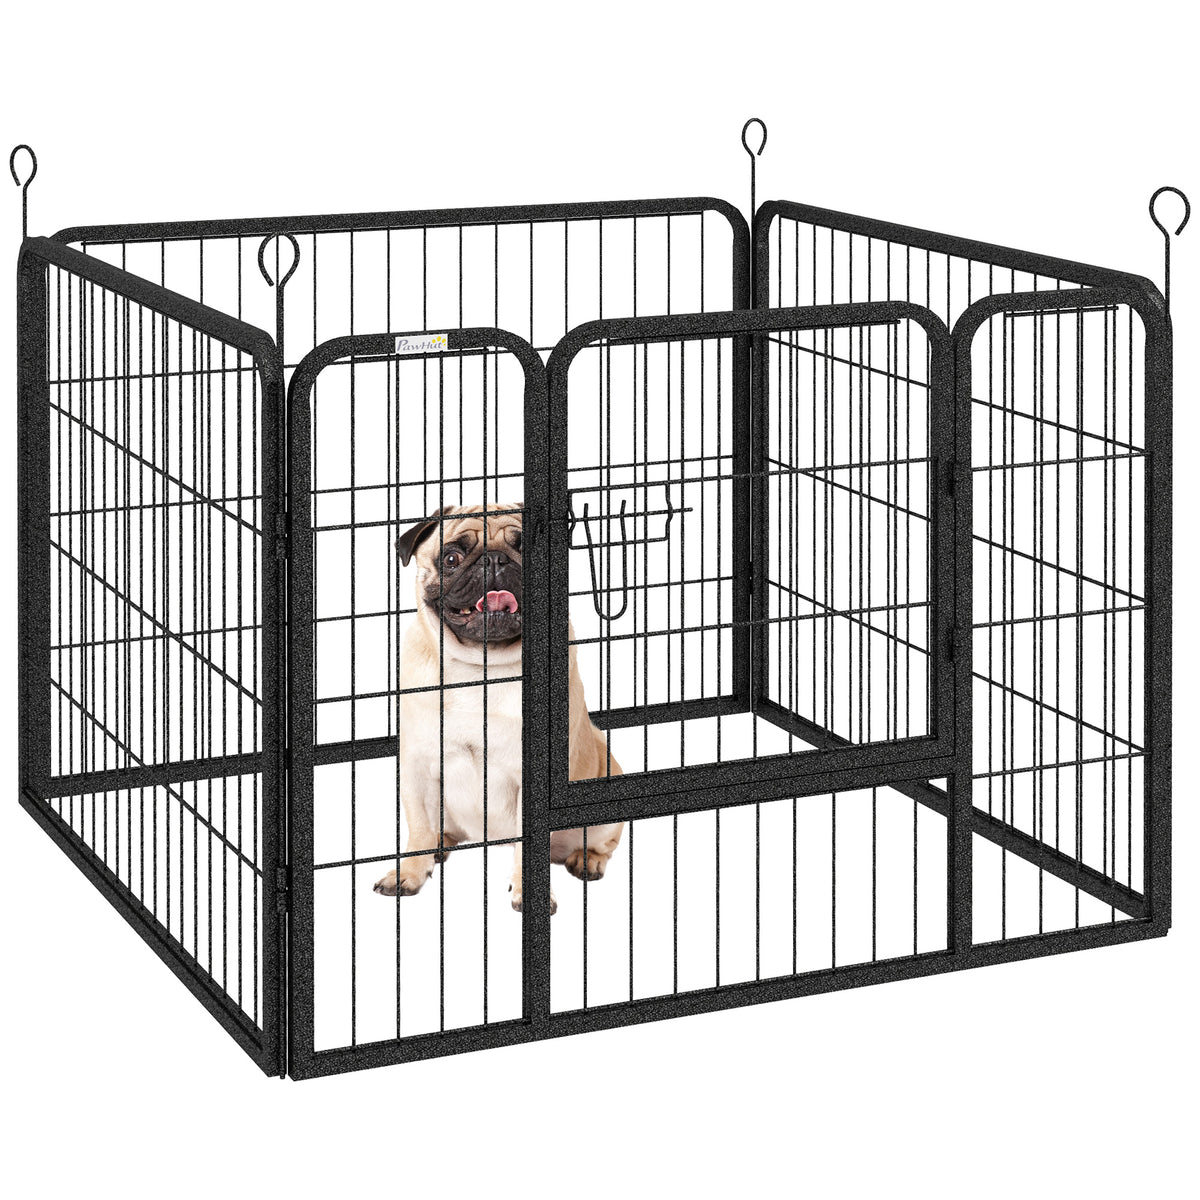 PawHut Heavy Duty Dog Playpen, 4 Panel Puppy Pen, Foldable Dog Kennel Both Indoor Outdoor Use Collapsible Design 82L x 82W x 60H (cm)